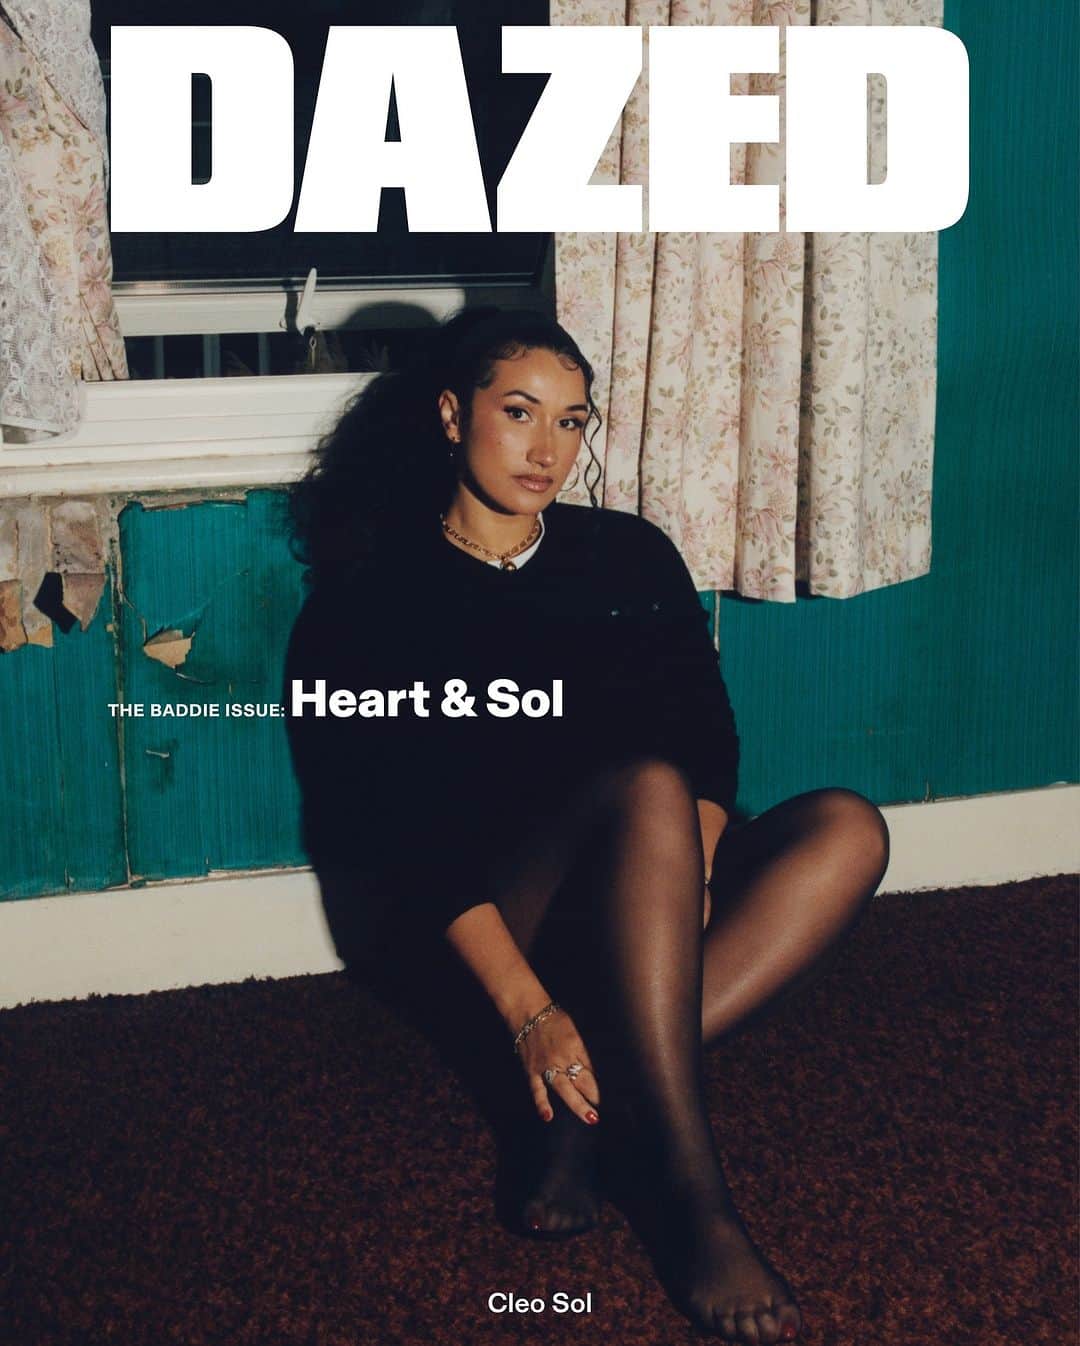 Dazed Magazineのインスタグラム：「Heart & Sol 🌞 Tender and devotional, the music of @gyallikeclee speaks in a way its author never felt comfortable sharing with the press. Stepping into her first-ever cover shoot for our Baddie issue, the singer opens up to her producer and soulmate @yardmanflo, about a collaboration built on love 💘⁠ ⁠ Tap the link in bio to read more 🔗⁠ ⁠ Photography @renellaice⁠ Styling @aikamoshita⁠ Hair @hbjbofficial⁠ Make-up @thefacefairy⁠ Nails @saffrongoddard⁠ Production @cebestudio⁠ Post Production @icestudios.co⁠ ⁠ Text @nopeconnor⁠ Interview @yardmanflo ⁠ ⁠ Editor-in-Chief @ibkamara⁠ Art Director @gareth_wrighton⁠ Editorial Director @kaci0n⁠ Fashion Director @imruh⁠ ⁠ #CleoSol wears all clothes @miumiu, Tiffany T gold earrings and Tiffany HardWear gold necklace @tiffanyandco⁠ ⁠ Taken from the winter 2023 #THEBADDIEISSUE of #Dazed」